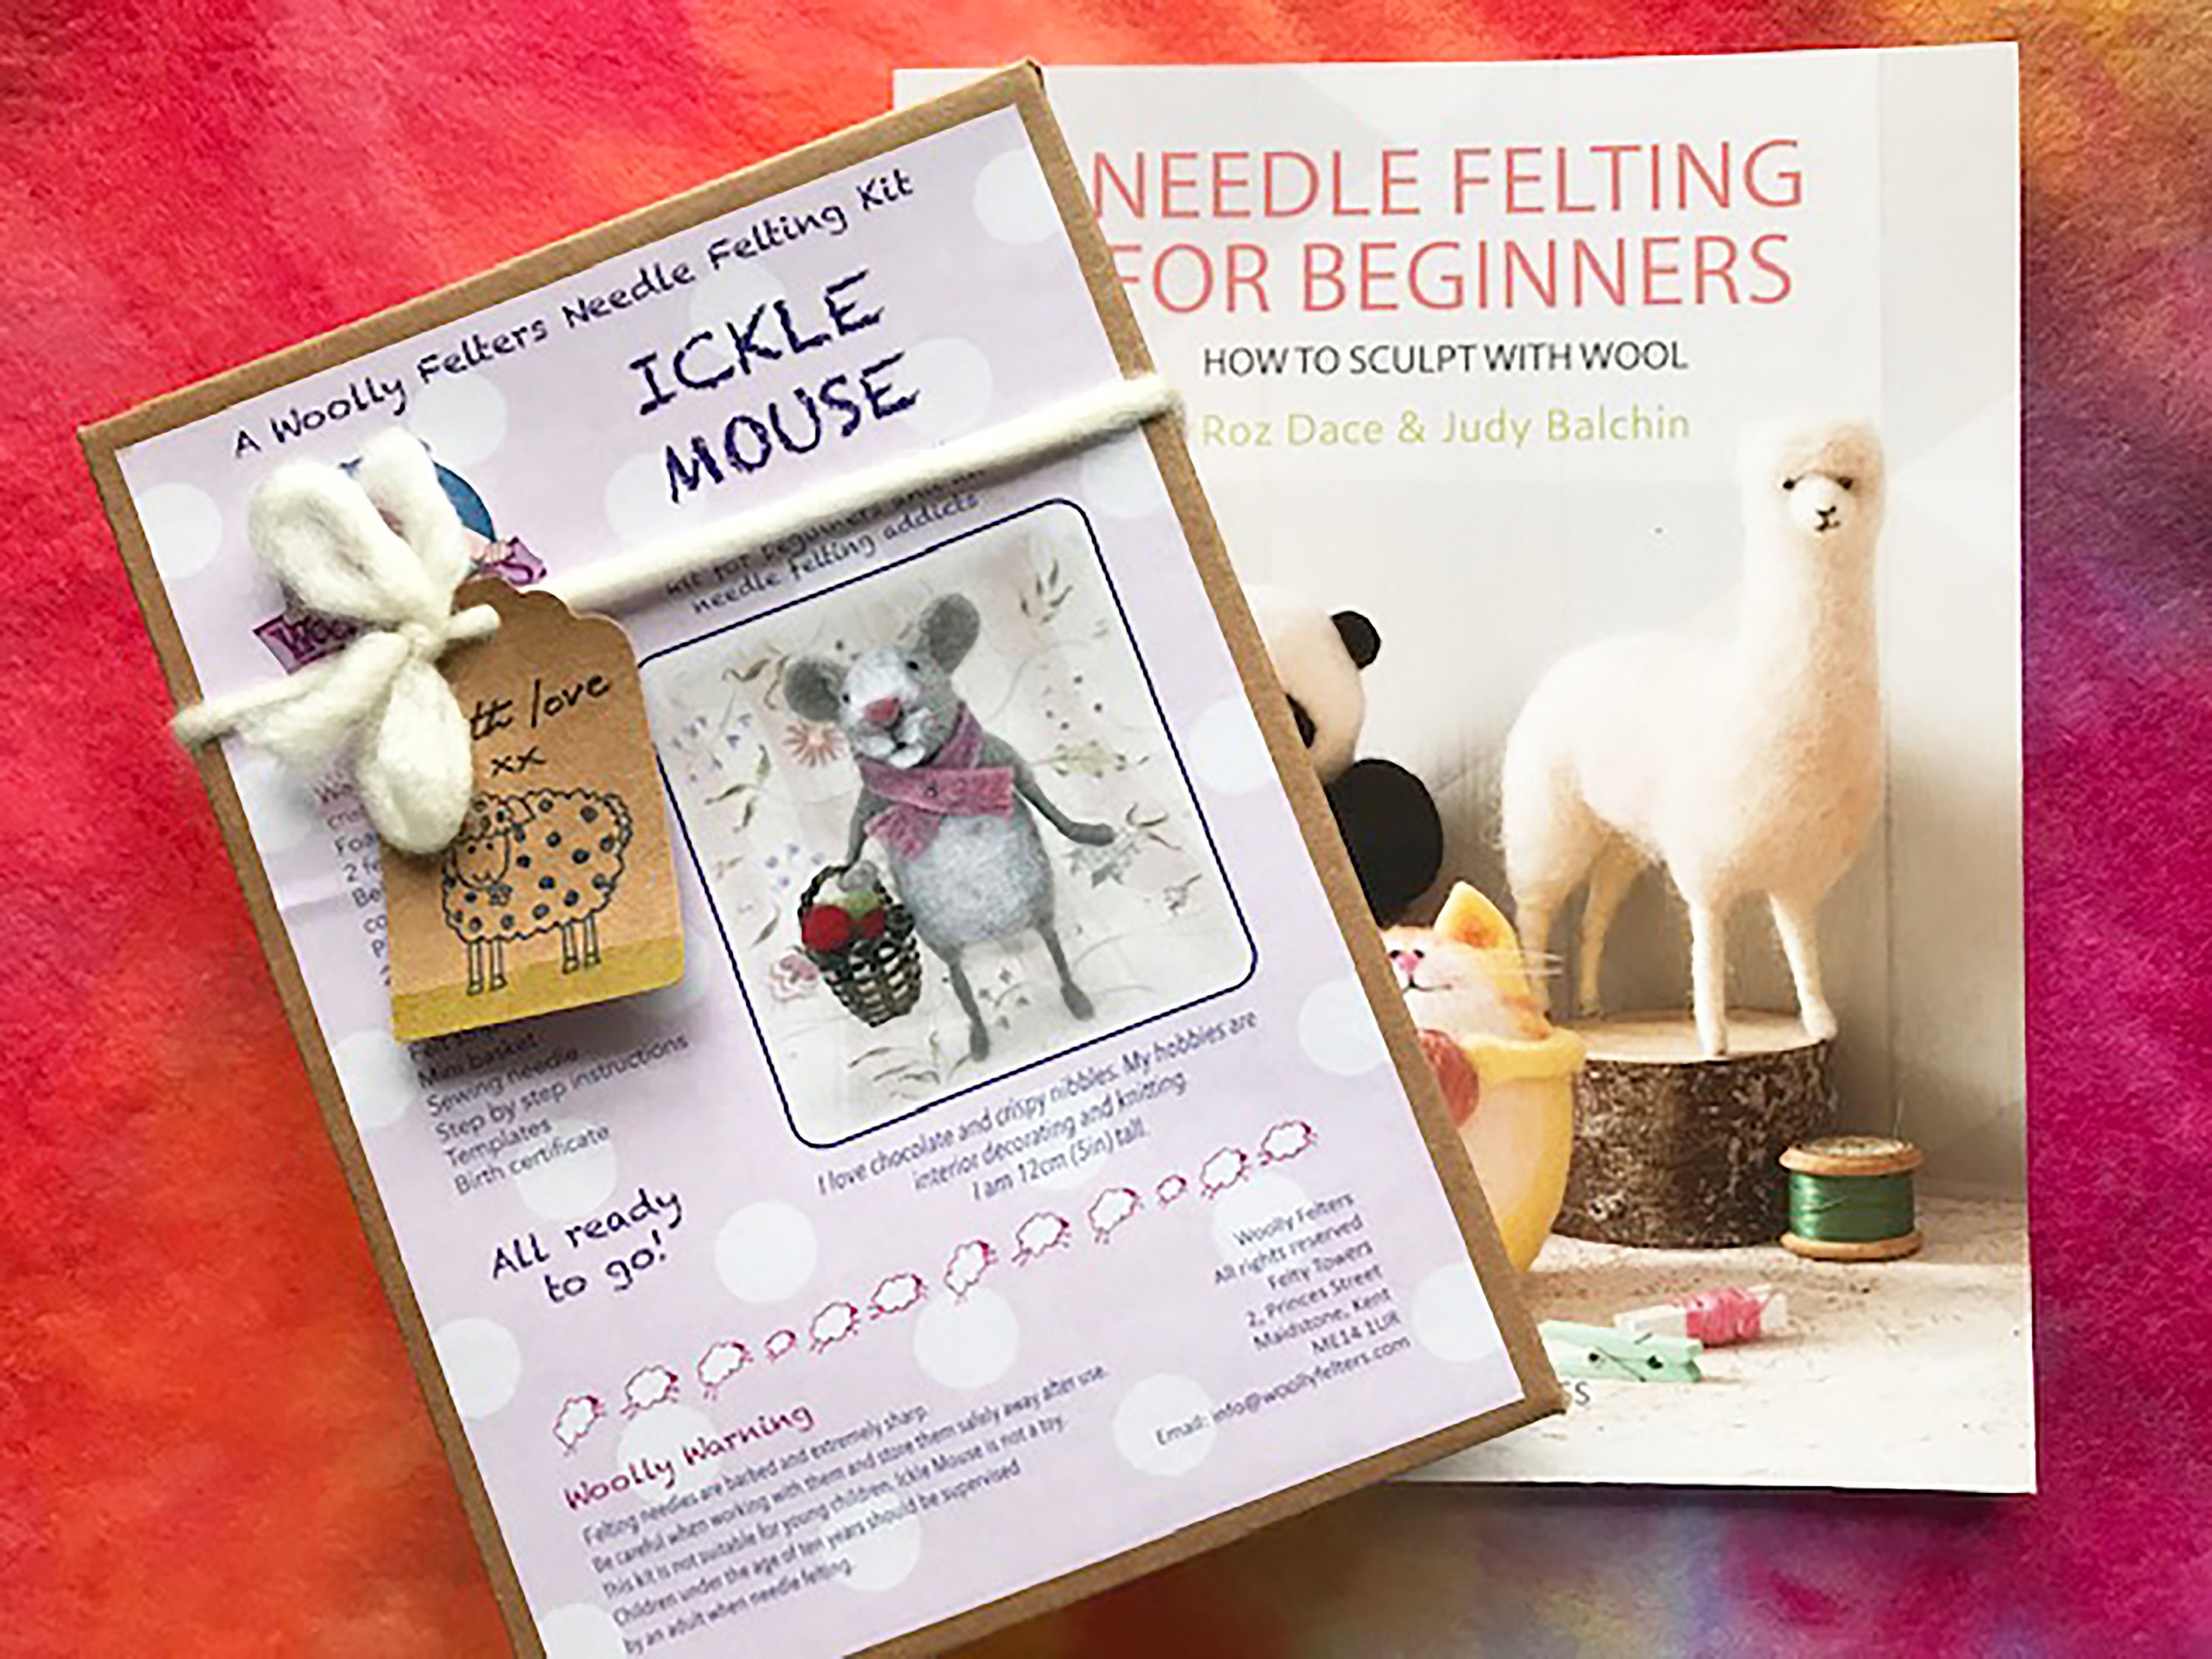 Needle Felting for Beginners book plus Ickle Mouse kit